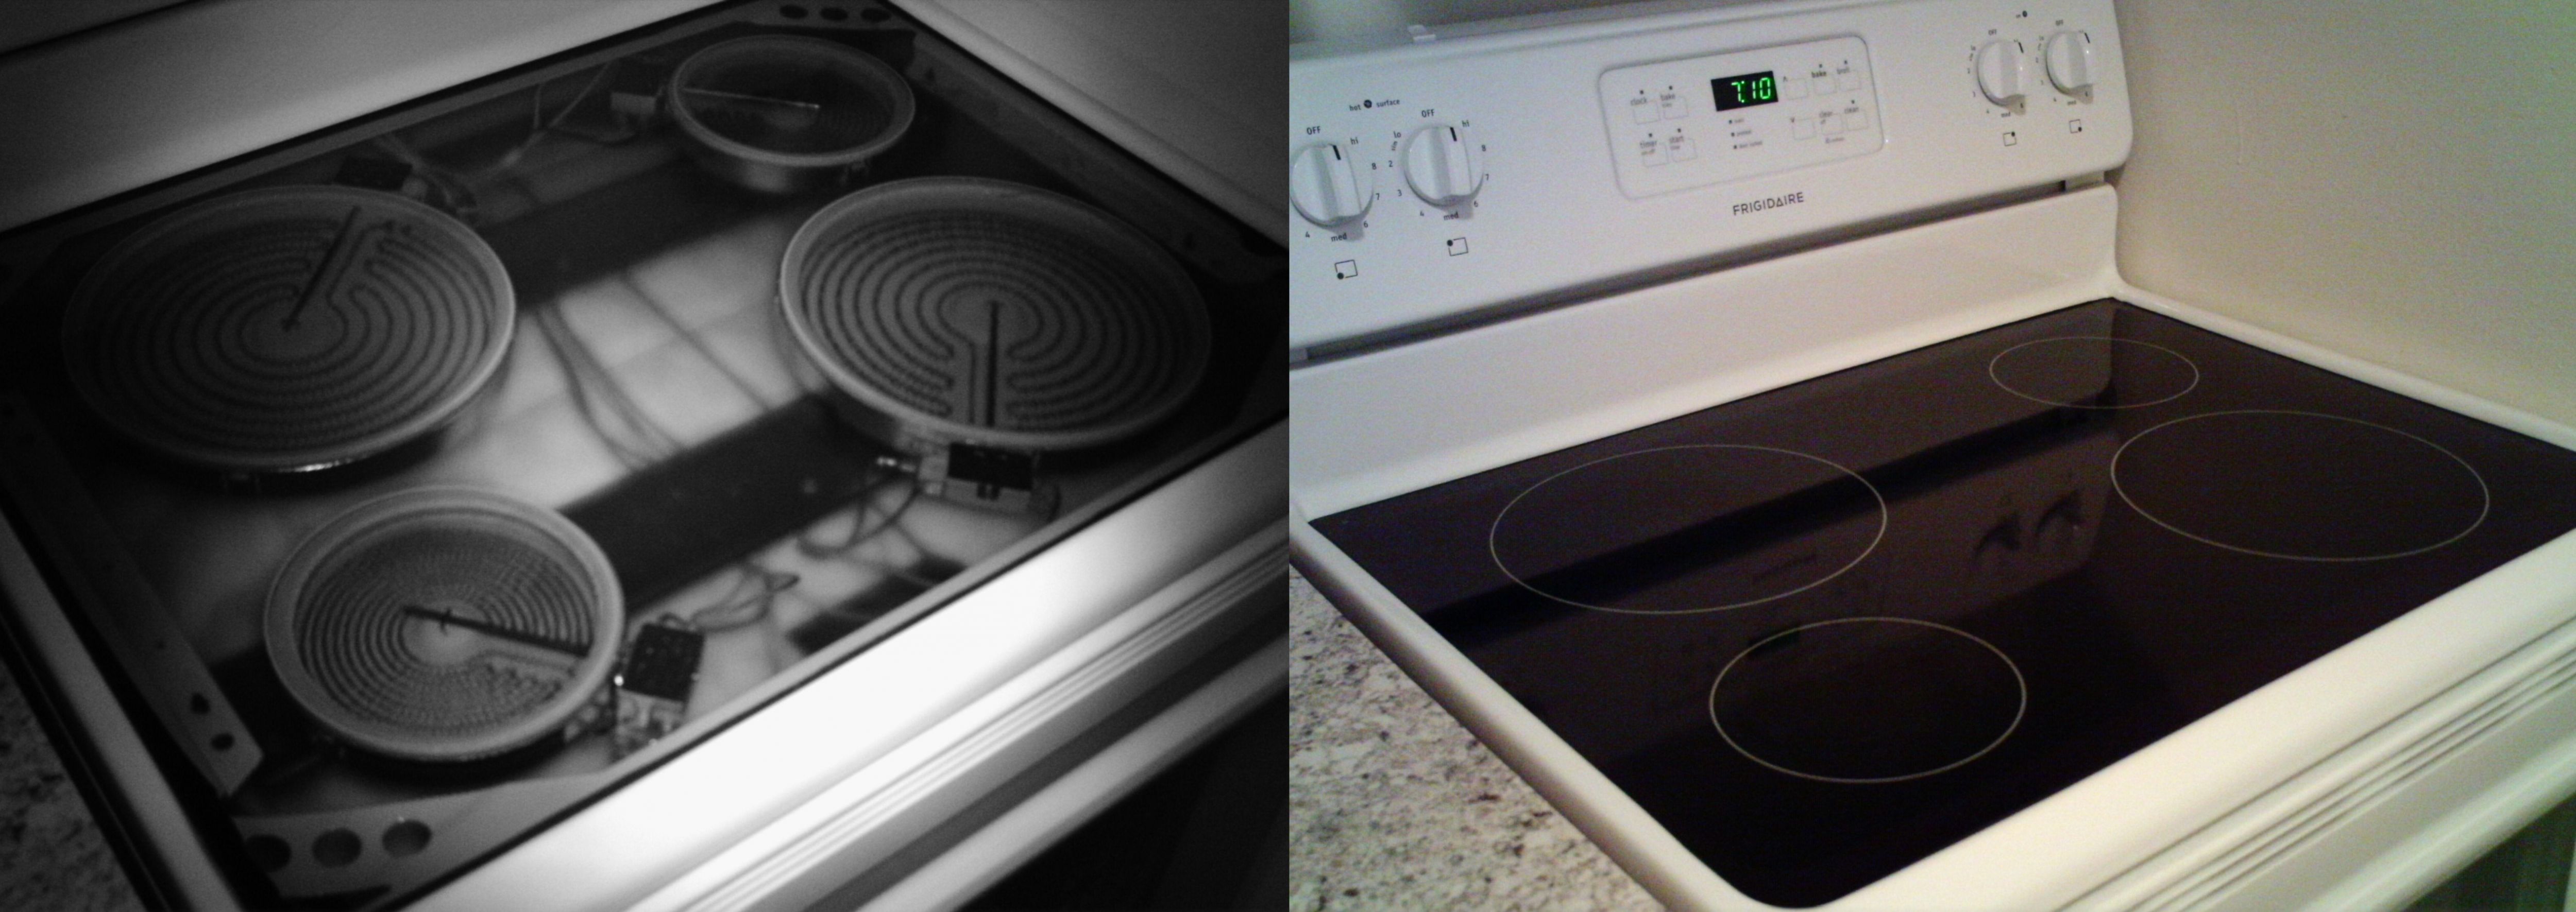 My infrared game camera can see through my stove top